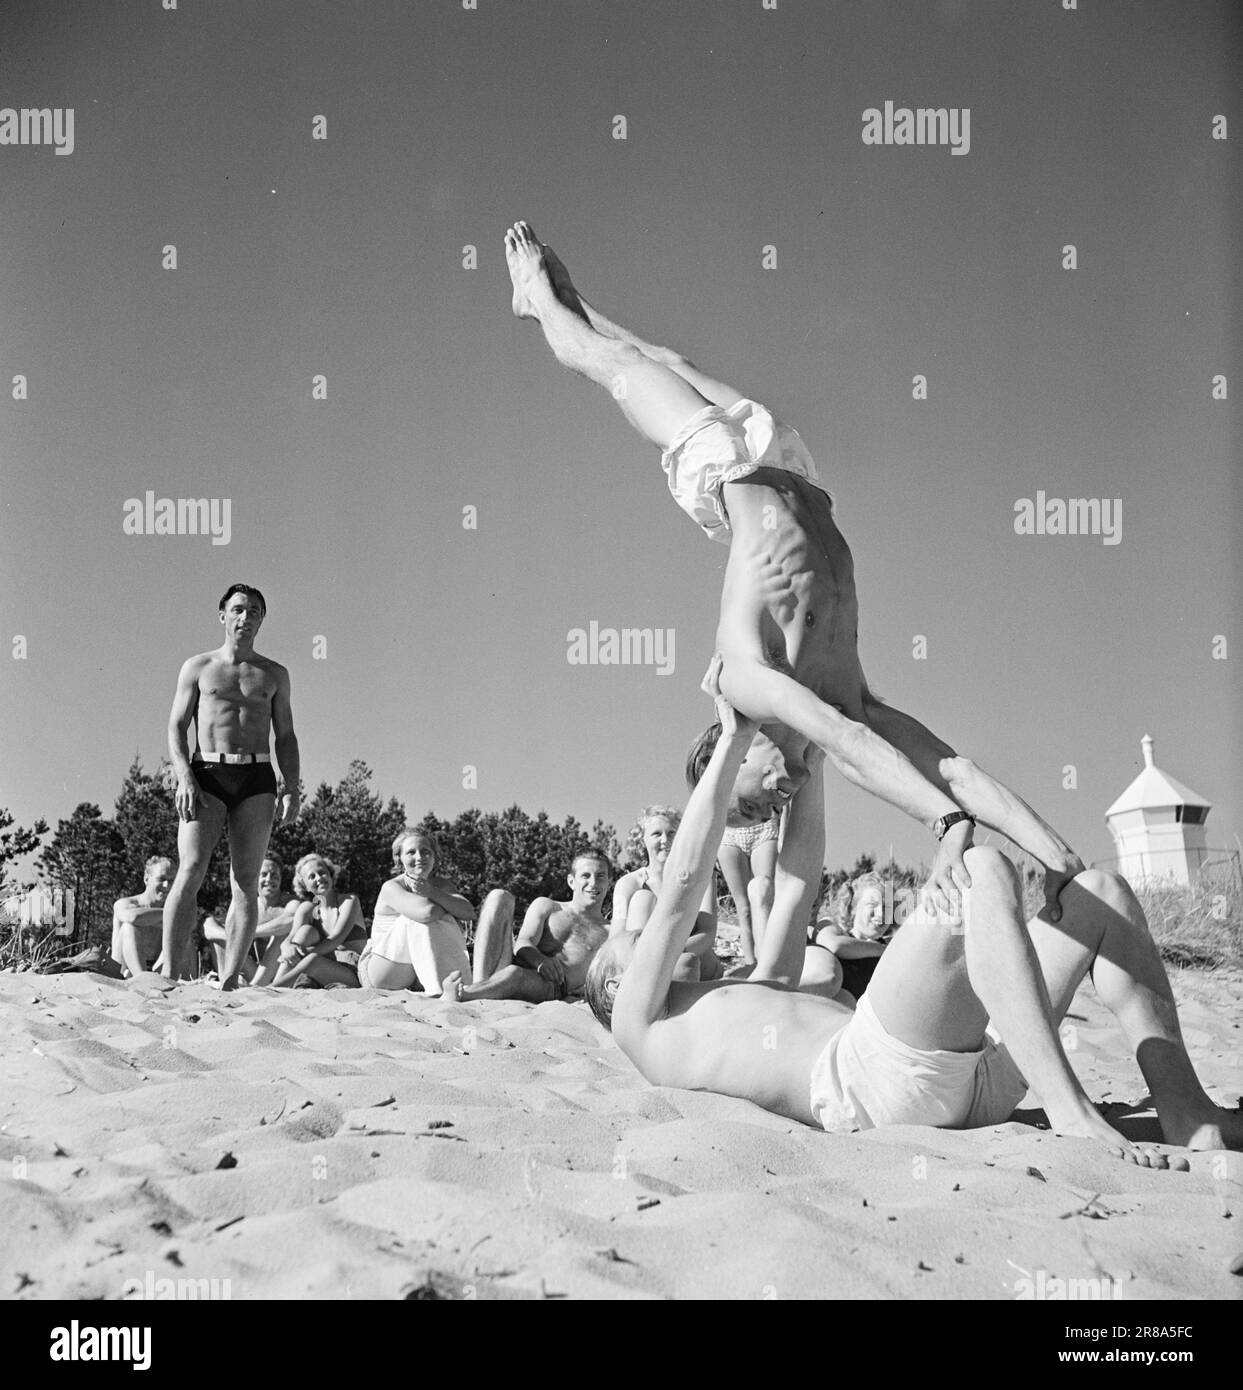 Current 15-1949: Sun and summer over Mandal- A lying Ross Farestad together with Ernst Thomassem gives a display of gymnastics for admirers in the background. The small round house t.h. is the 'Grandmother Lighthouse'.  Photo; Sverre A. Børretzen / Aktuell / NTB  ***PHOTO NOT IMAGE PROCESSED*** Stock Photo